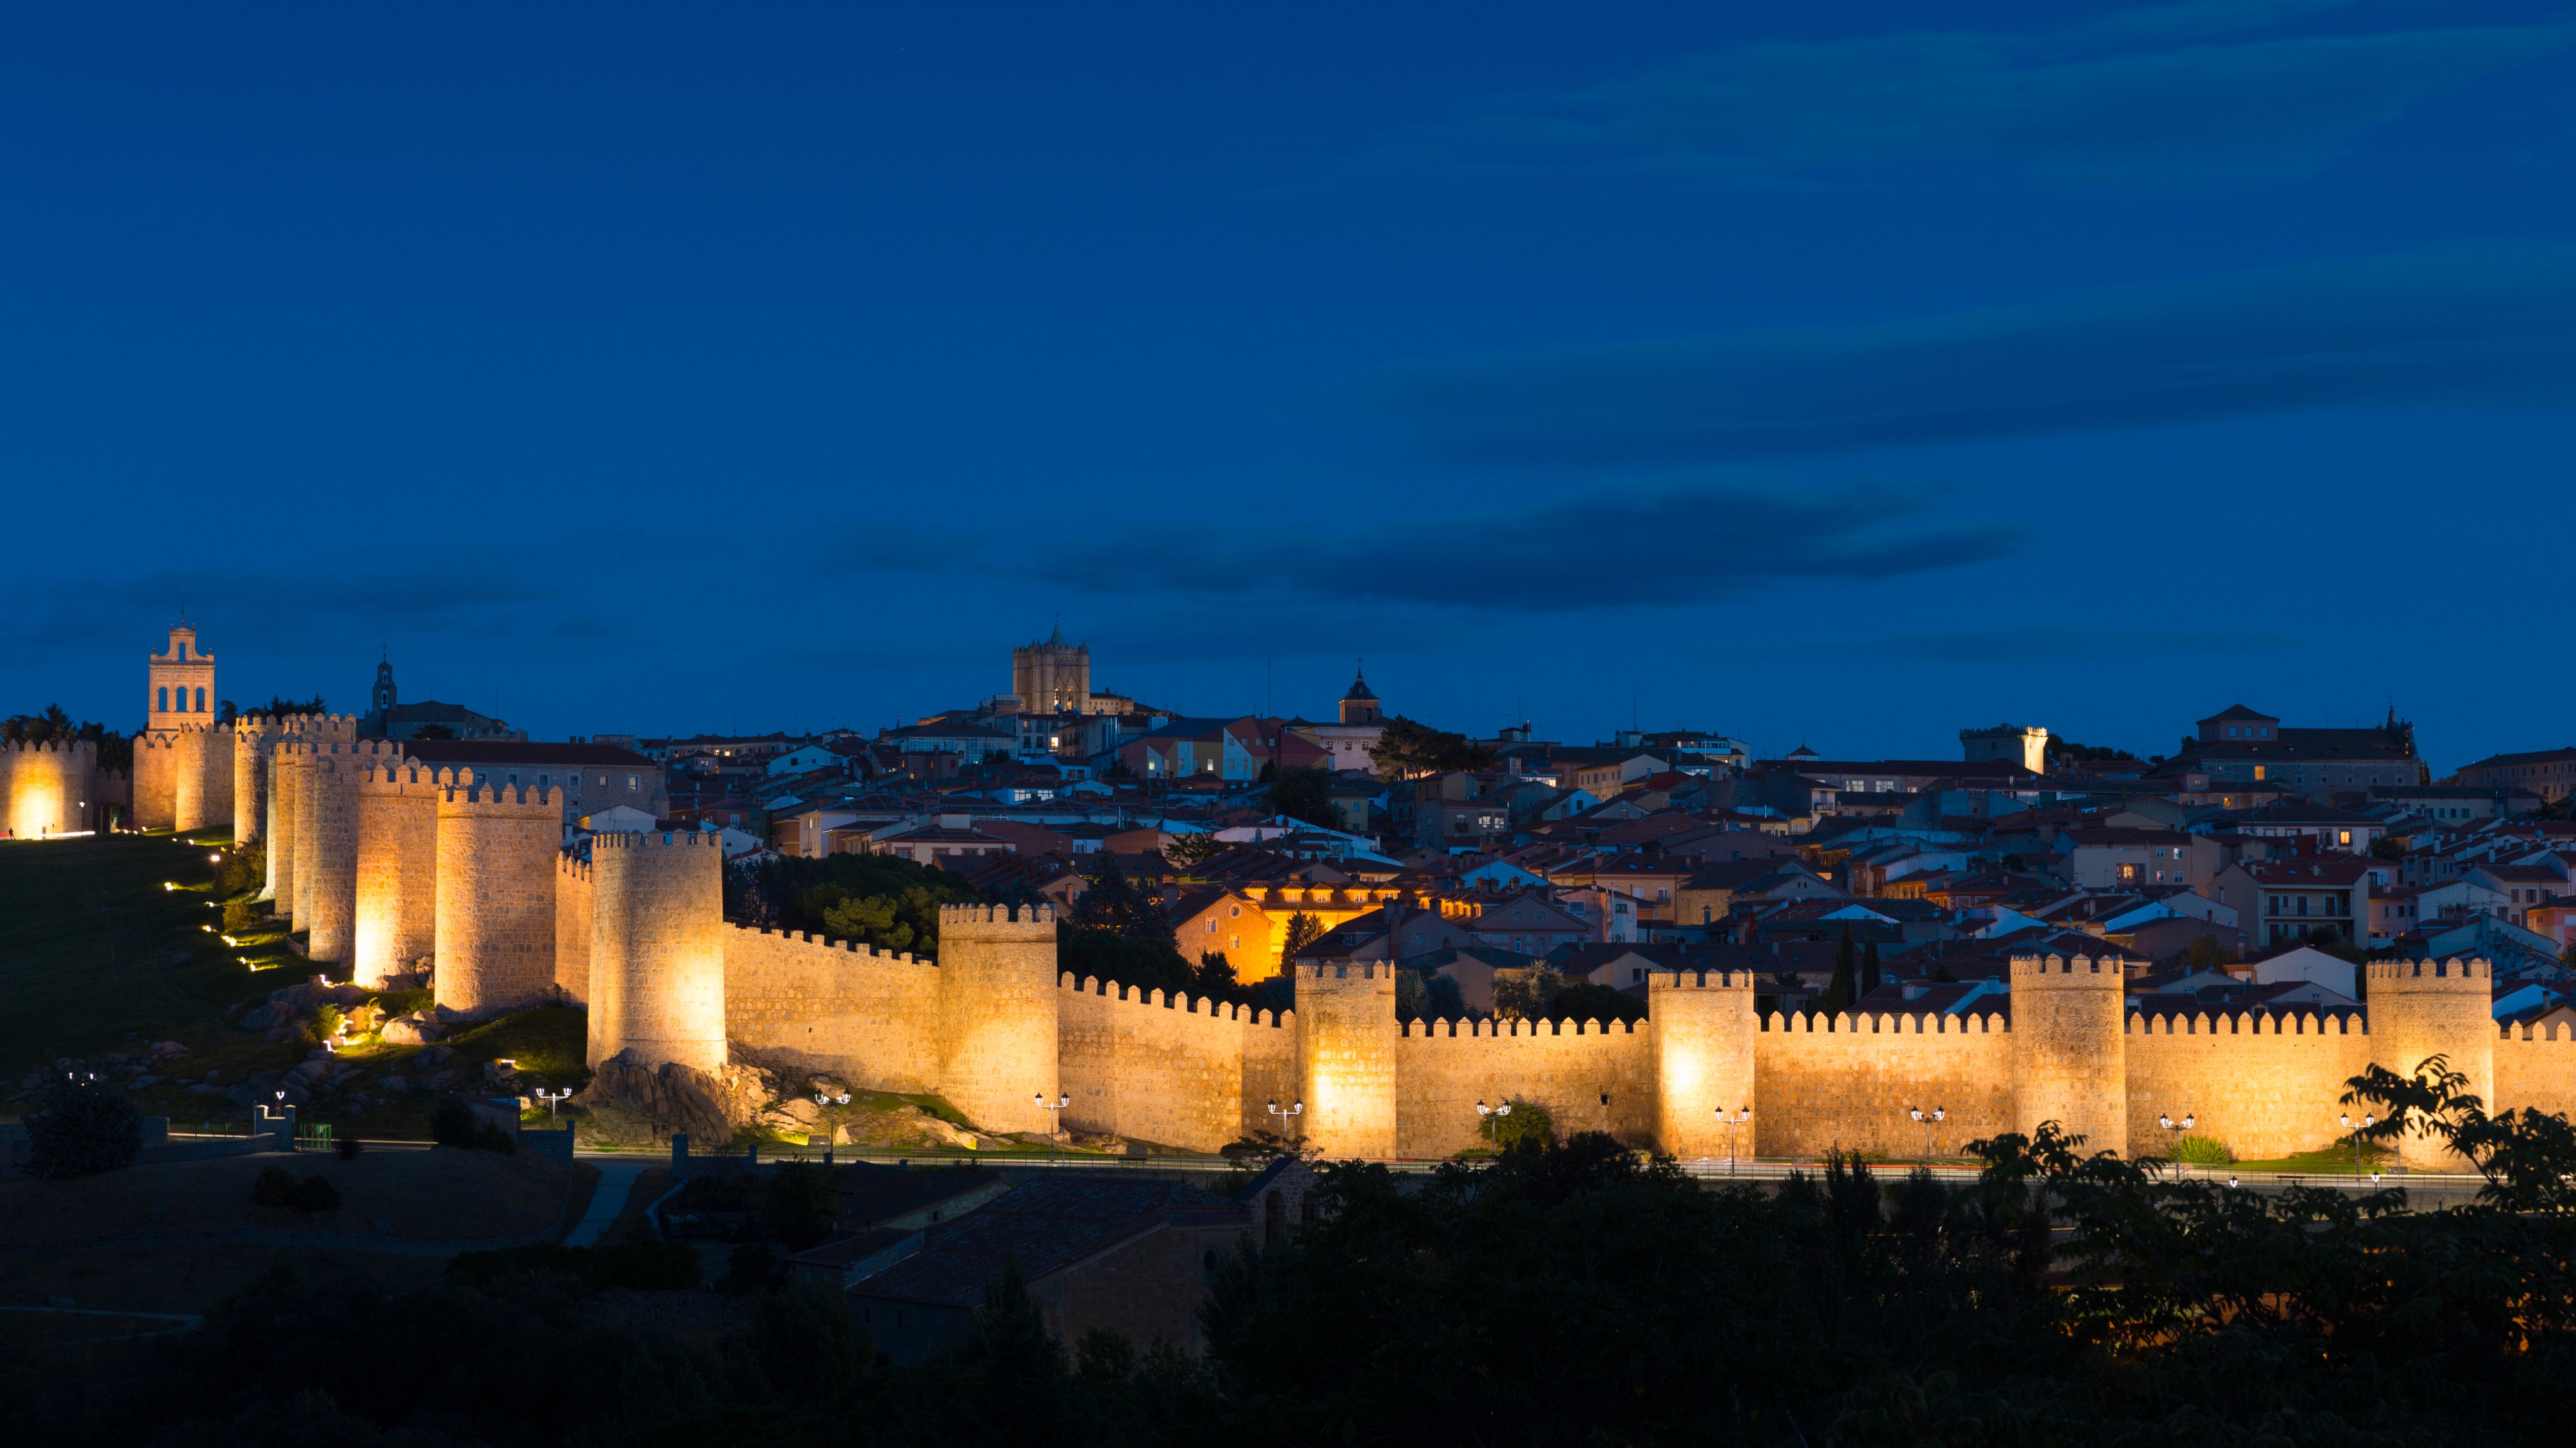 Old Town of Avila and Medieval Walls, Spain